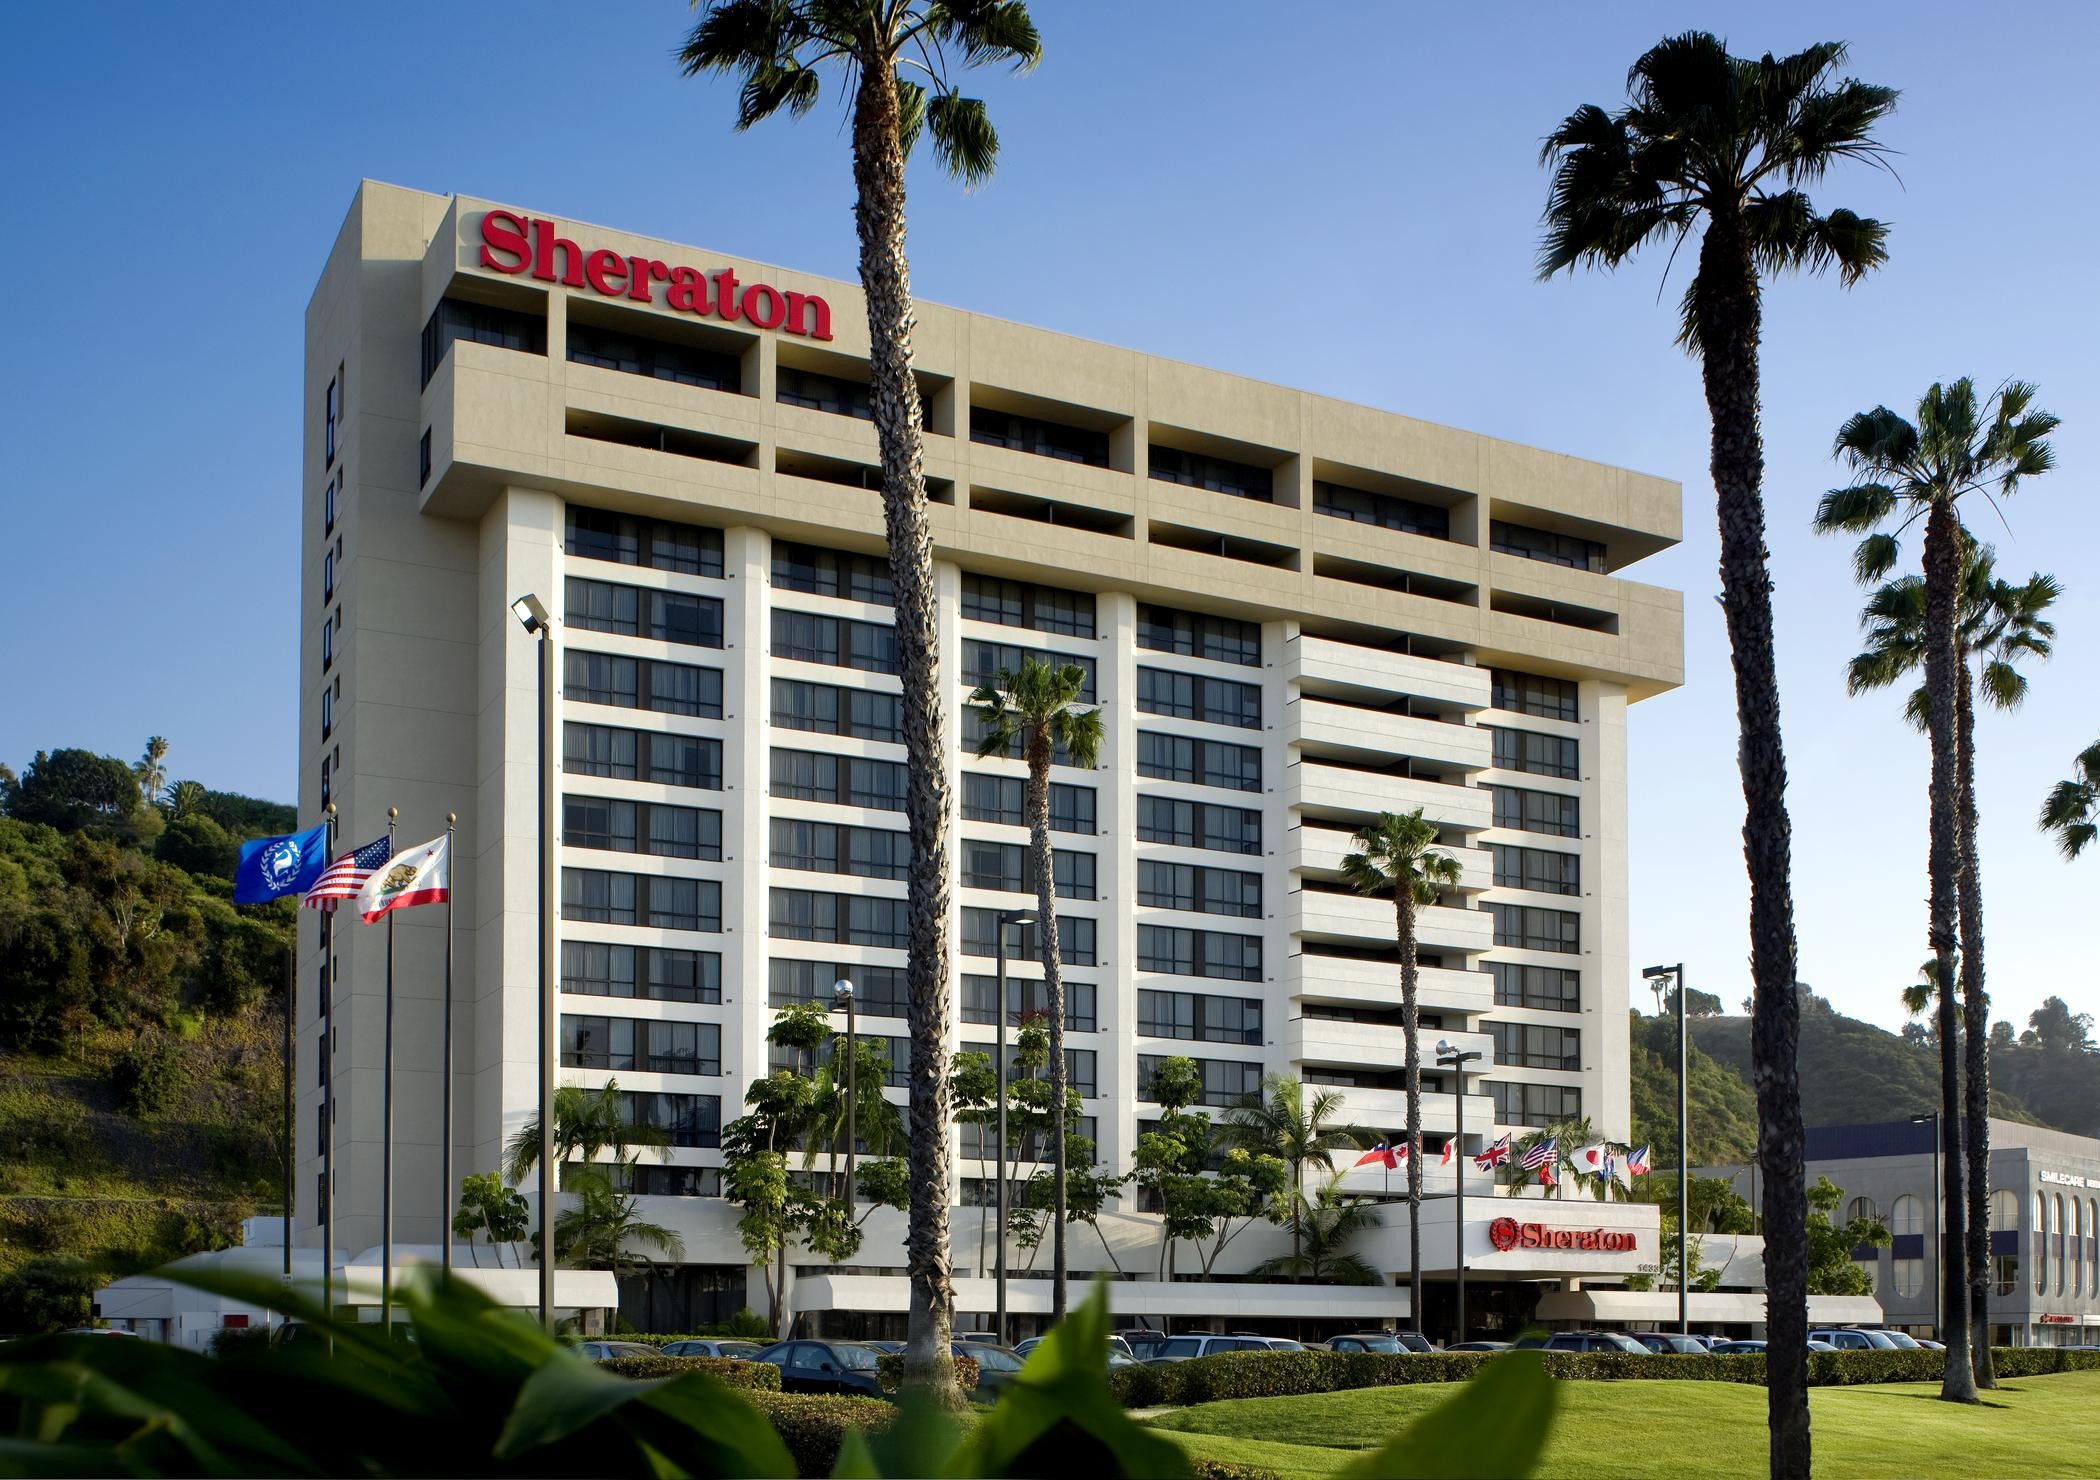 Sheraton Mission Valley San Diego Hotel image